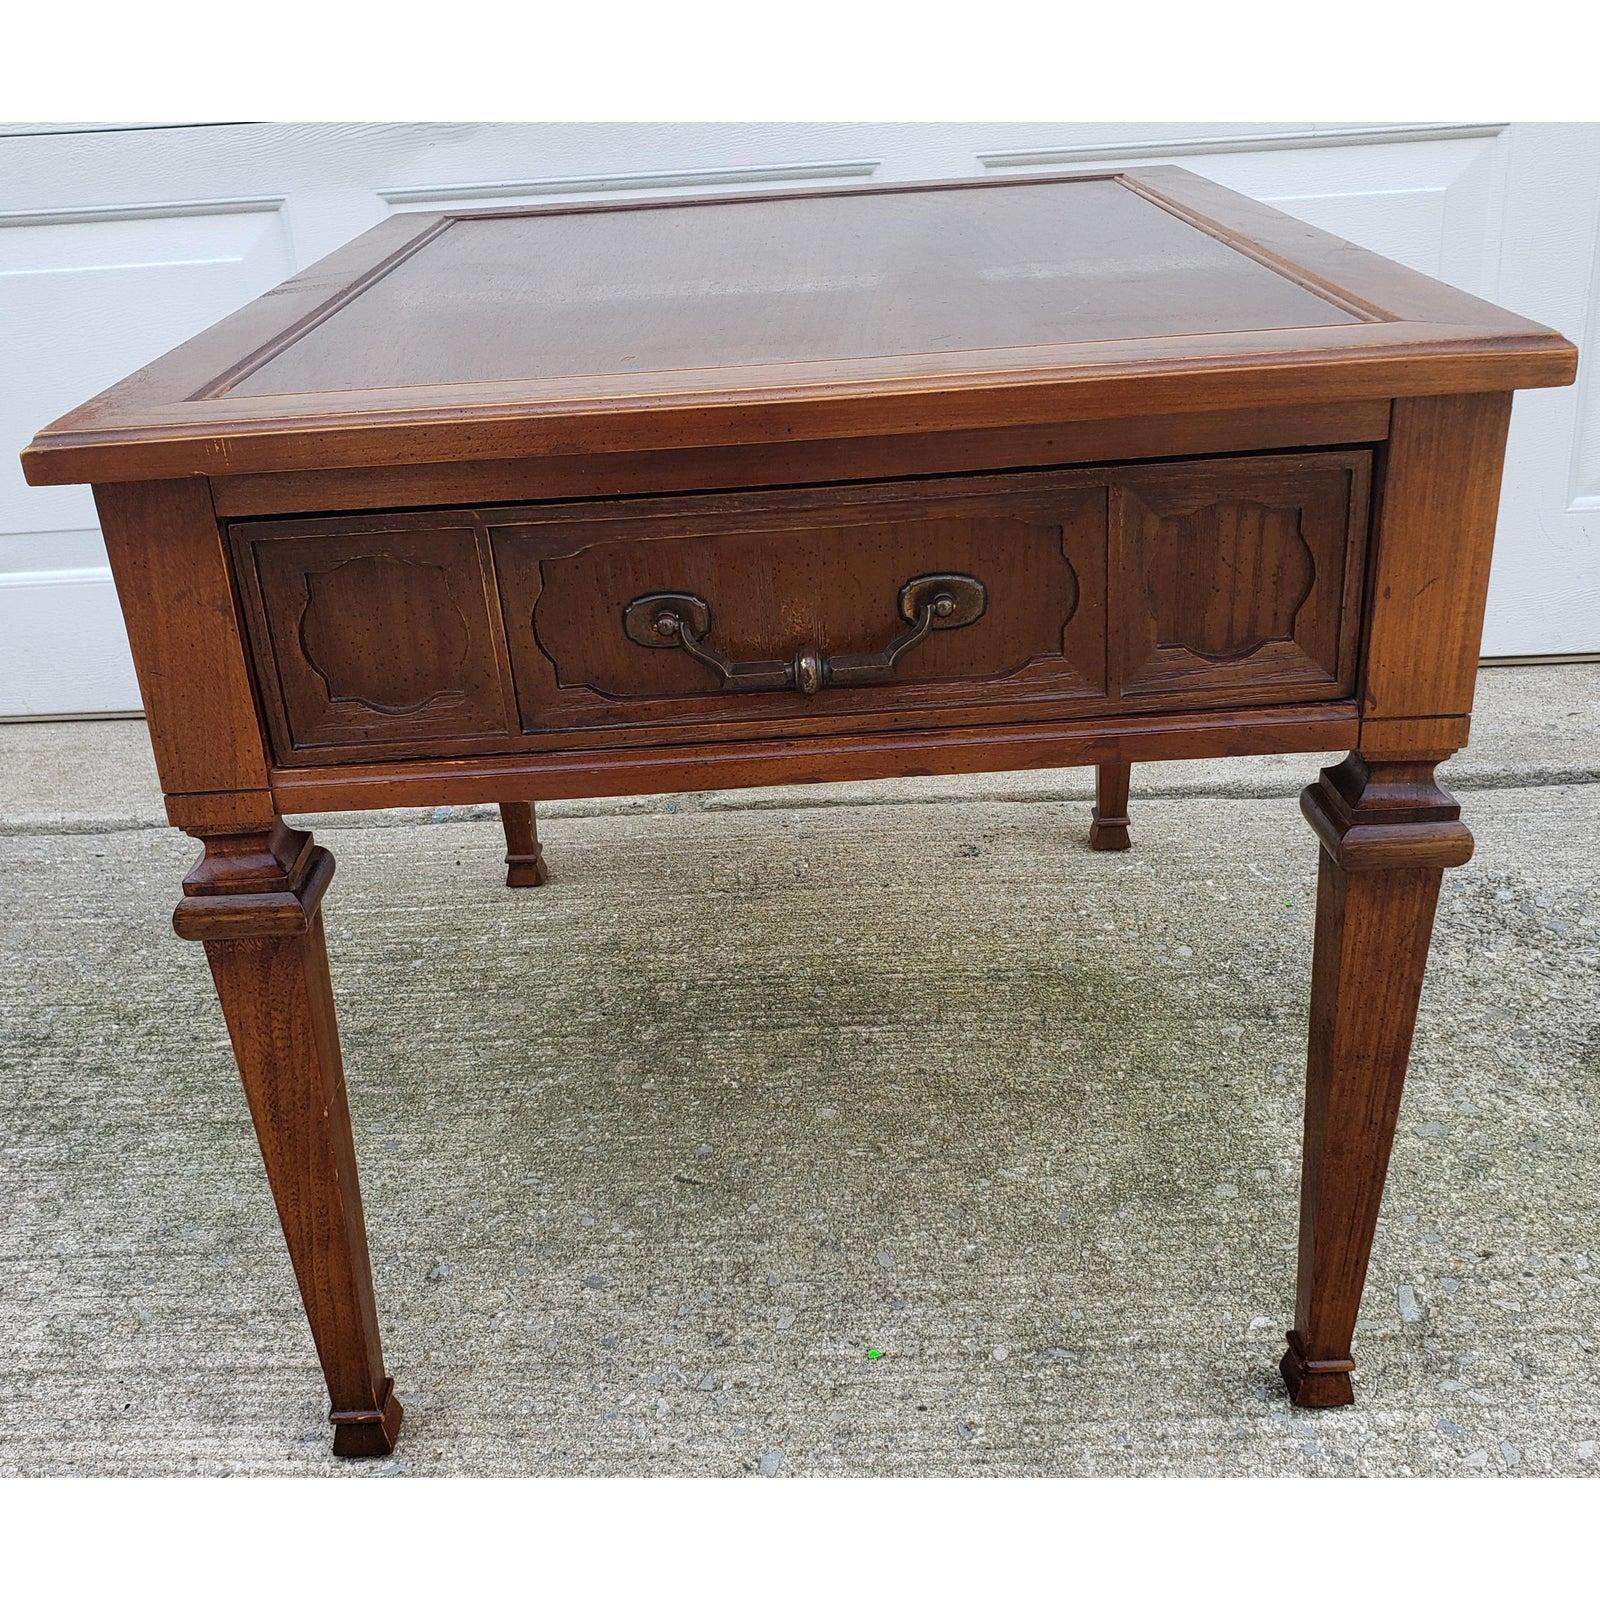 1967 walnut wood end table with with one drawer. It has the original brass handle. Table measures 22.5